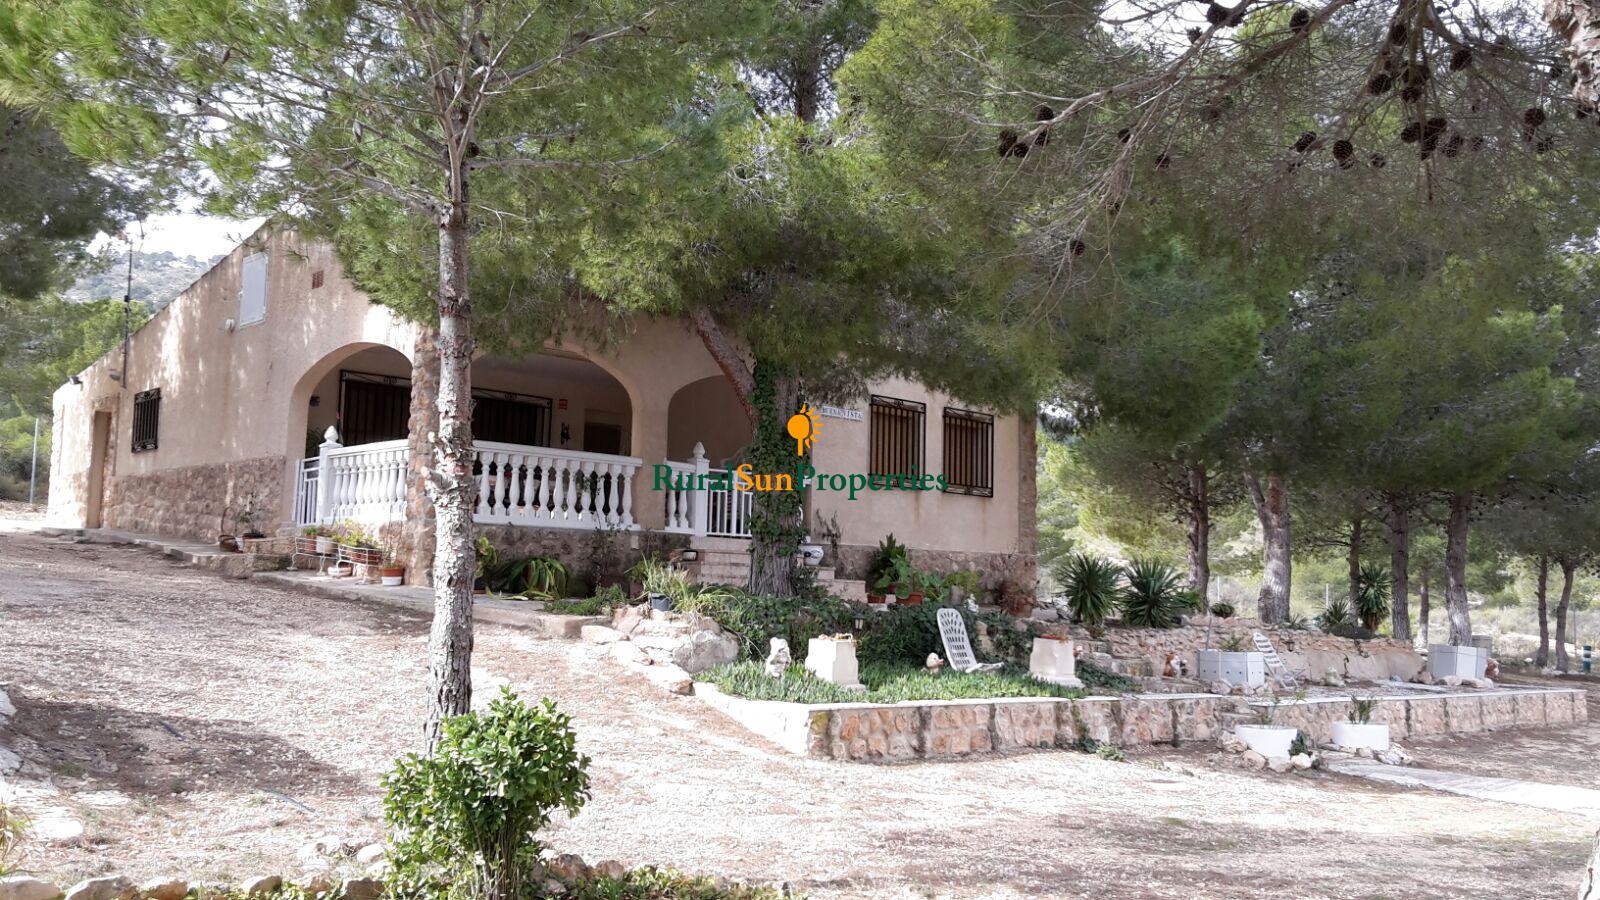 SOLD. Sale country house/finca for sale in Yecla. 10,000 sq.m plot